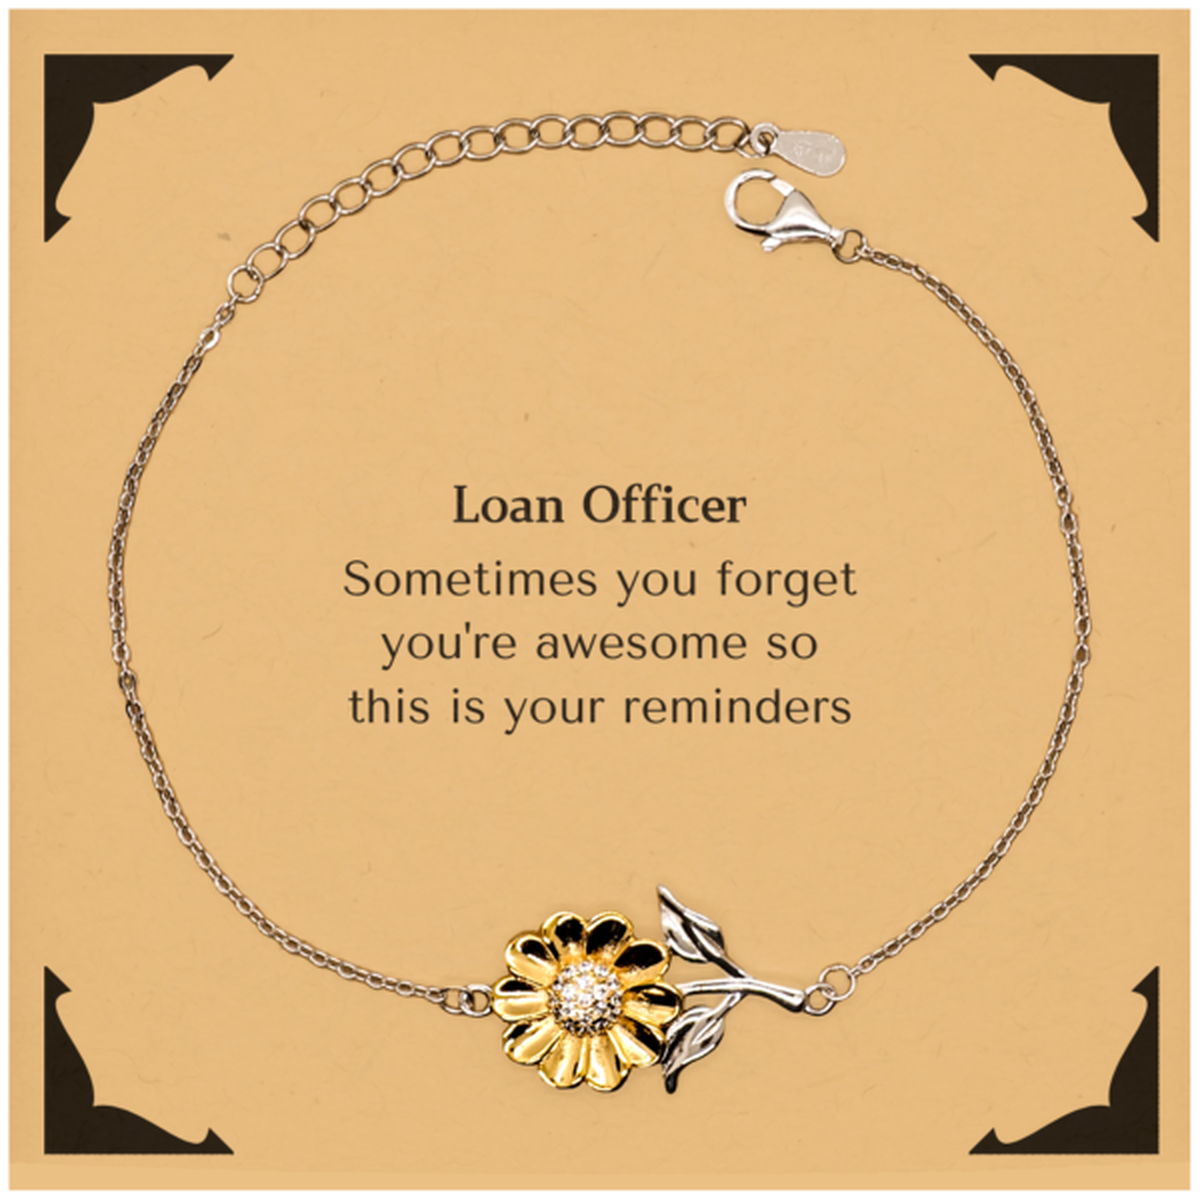 Sentimental Loan Officer Sunflower Bracelet, Loan Officer Sometimes you forget you're awesome so this is your reminders, Graduation Christmas Birthday Gifts for Loan Officer, Men, Women, Coworkers